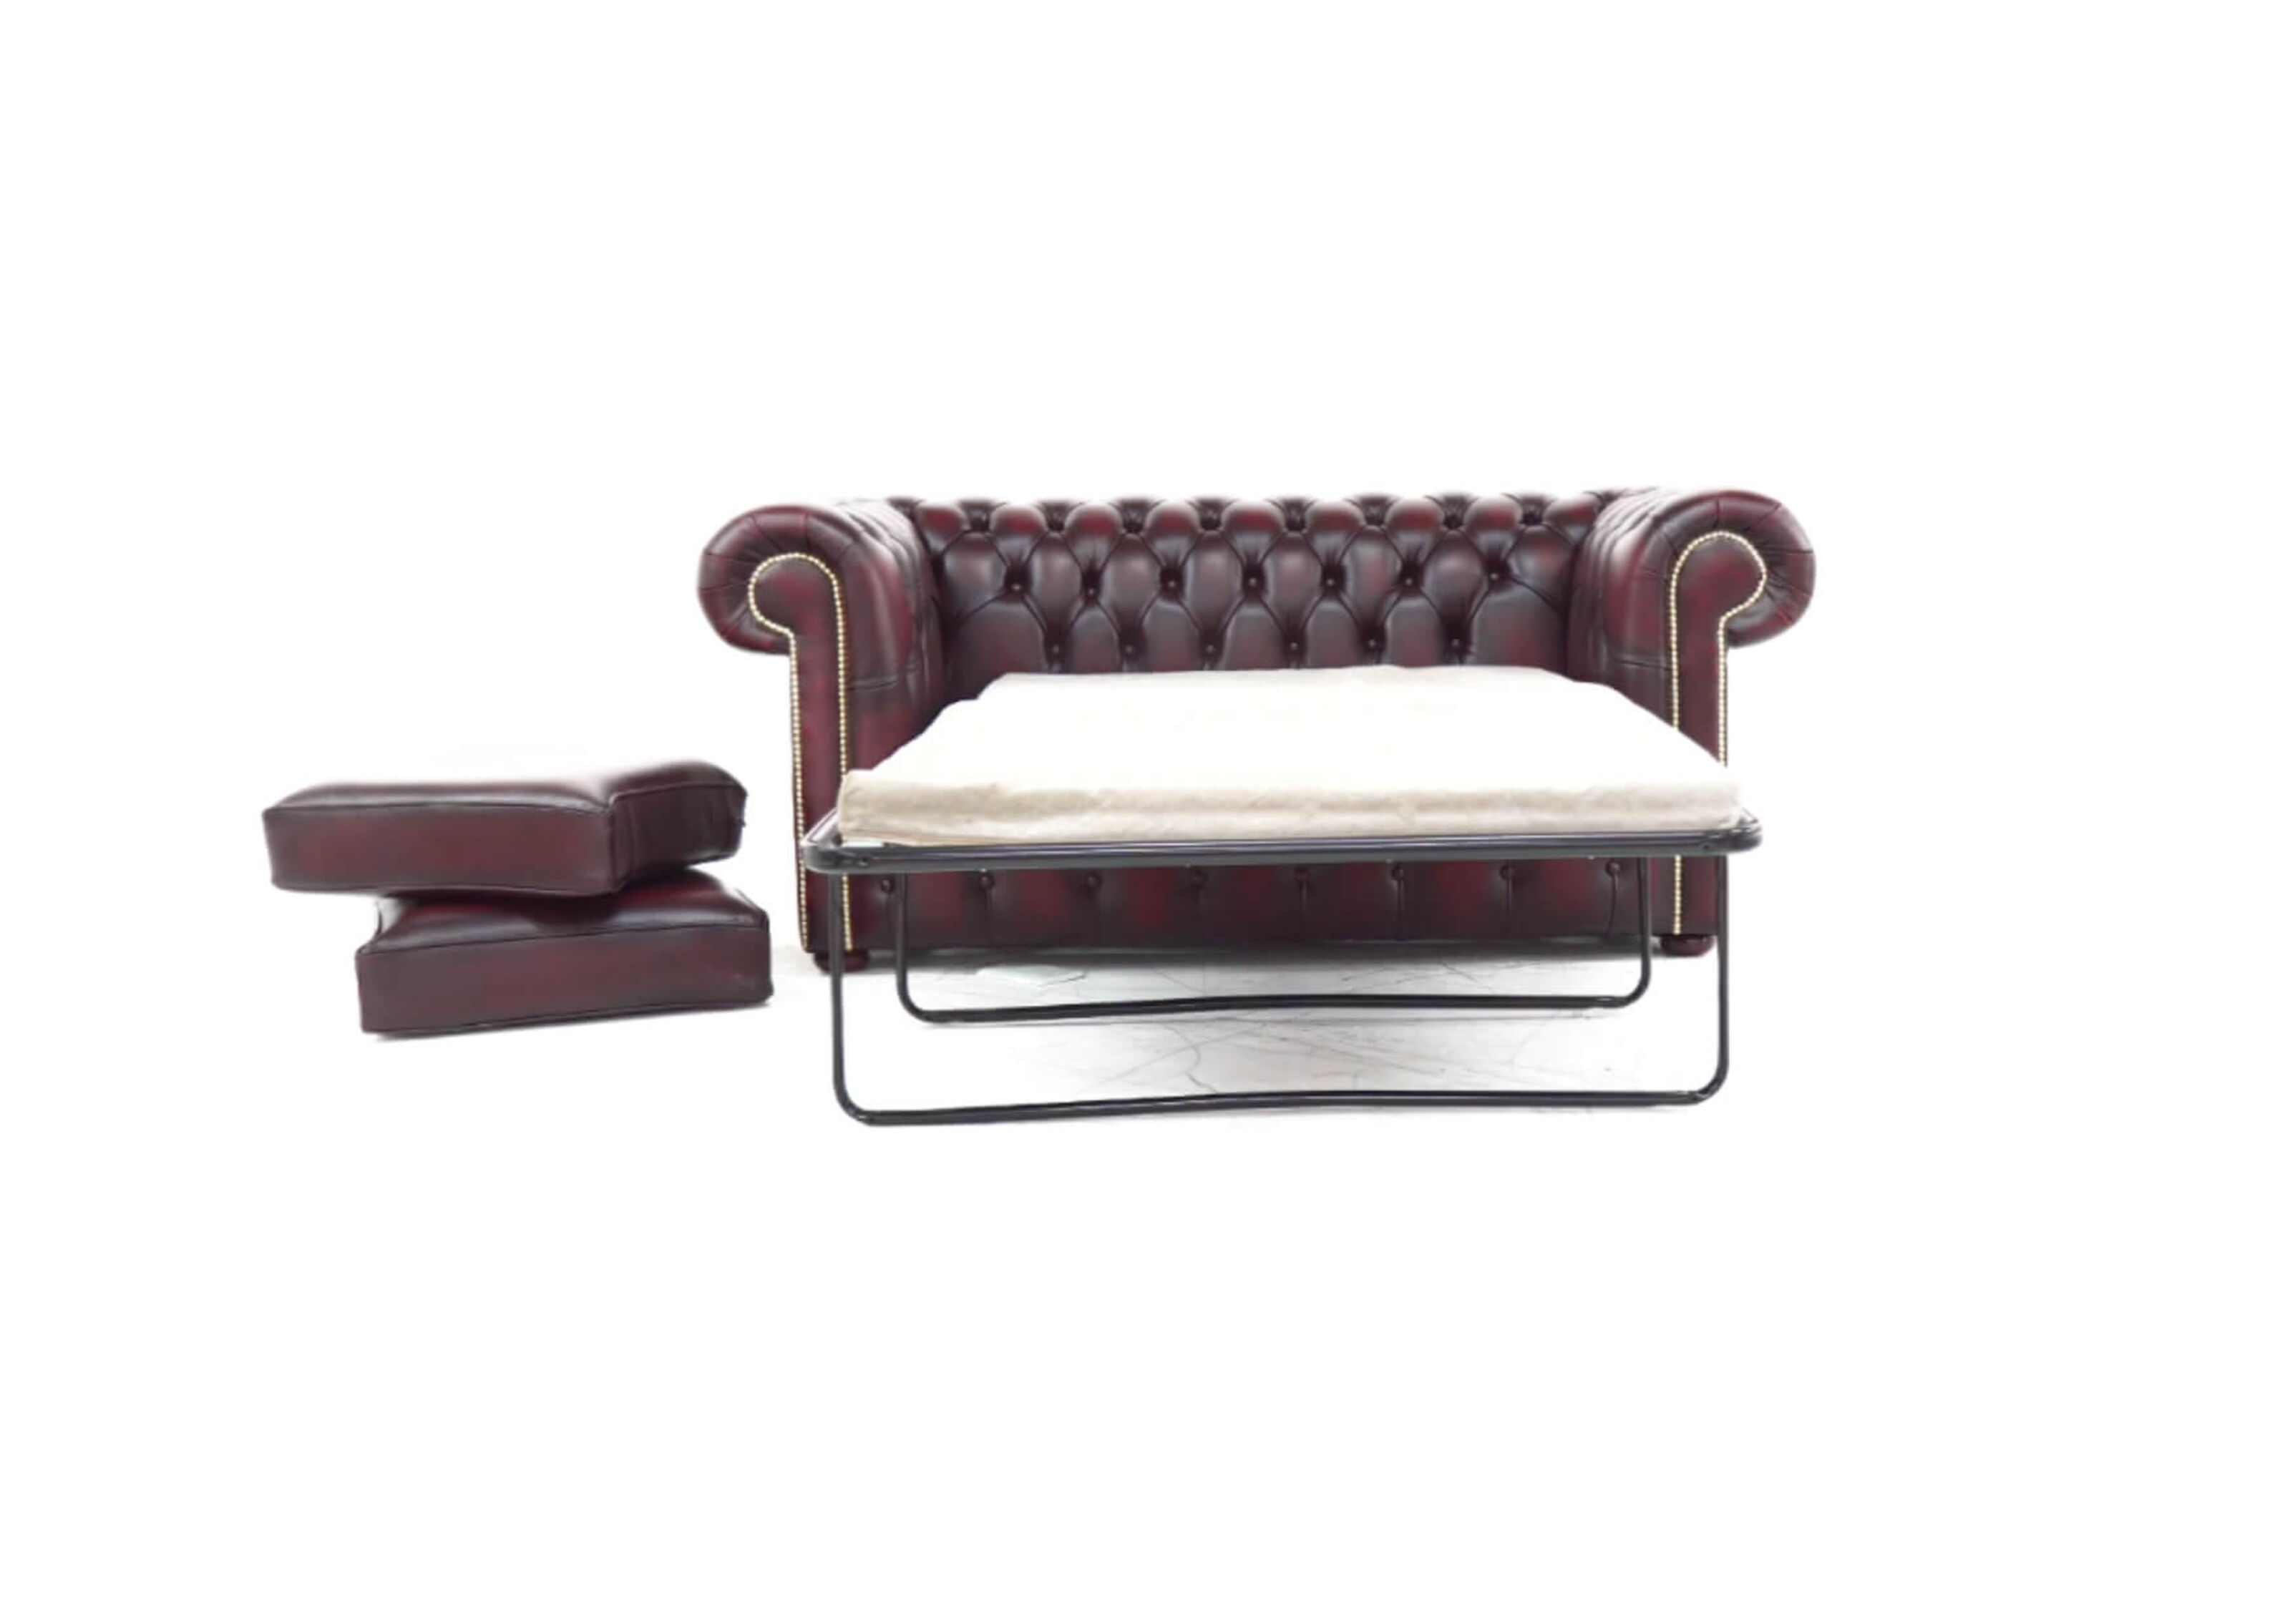 Browsing eBay for Chesterfield Sofas Timeless Elegance at Your Fingertips  %Post Title